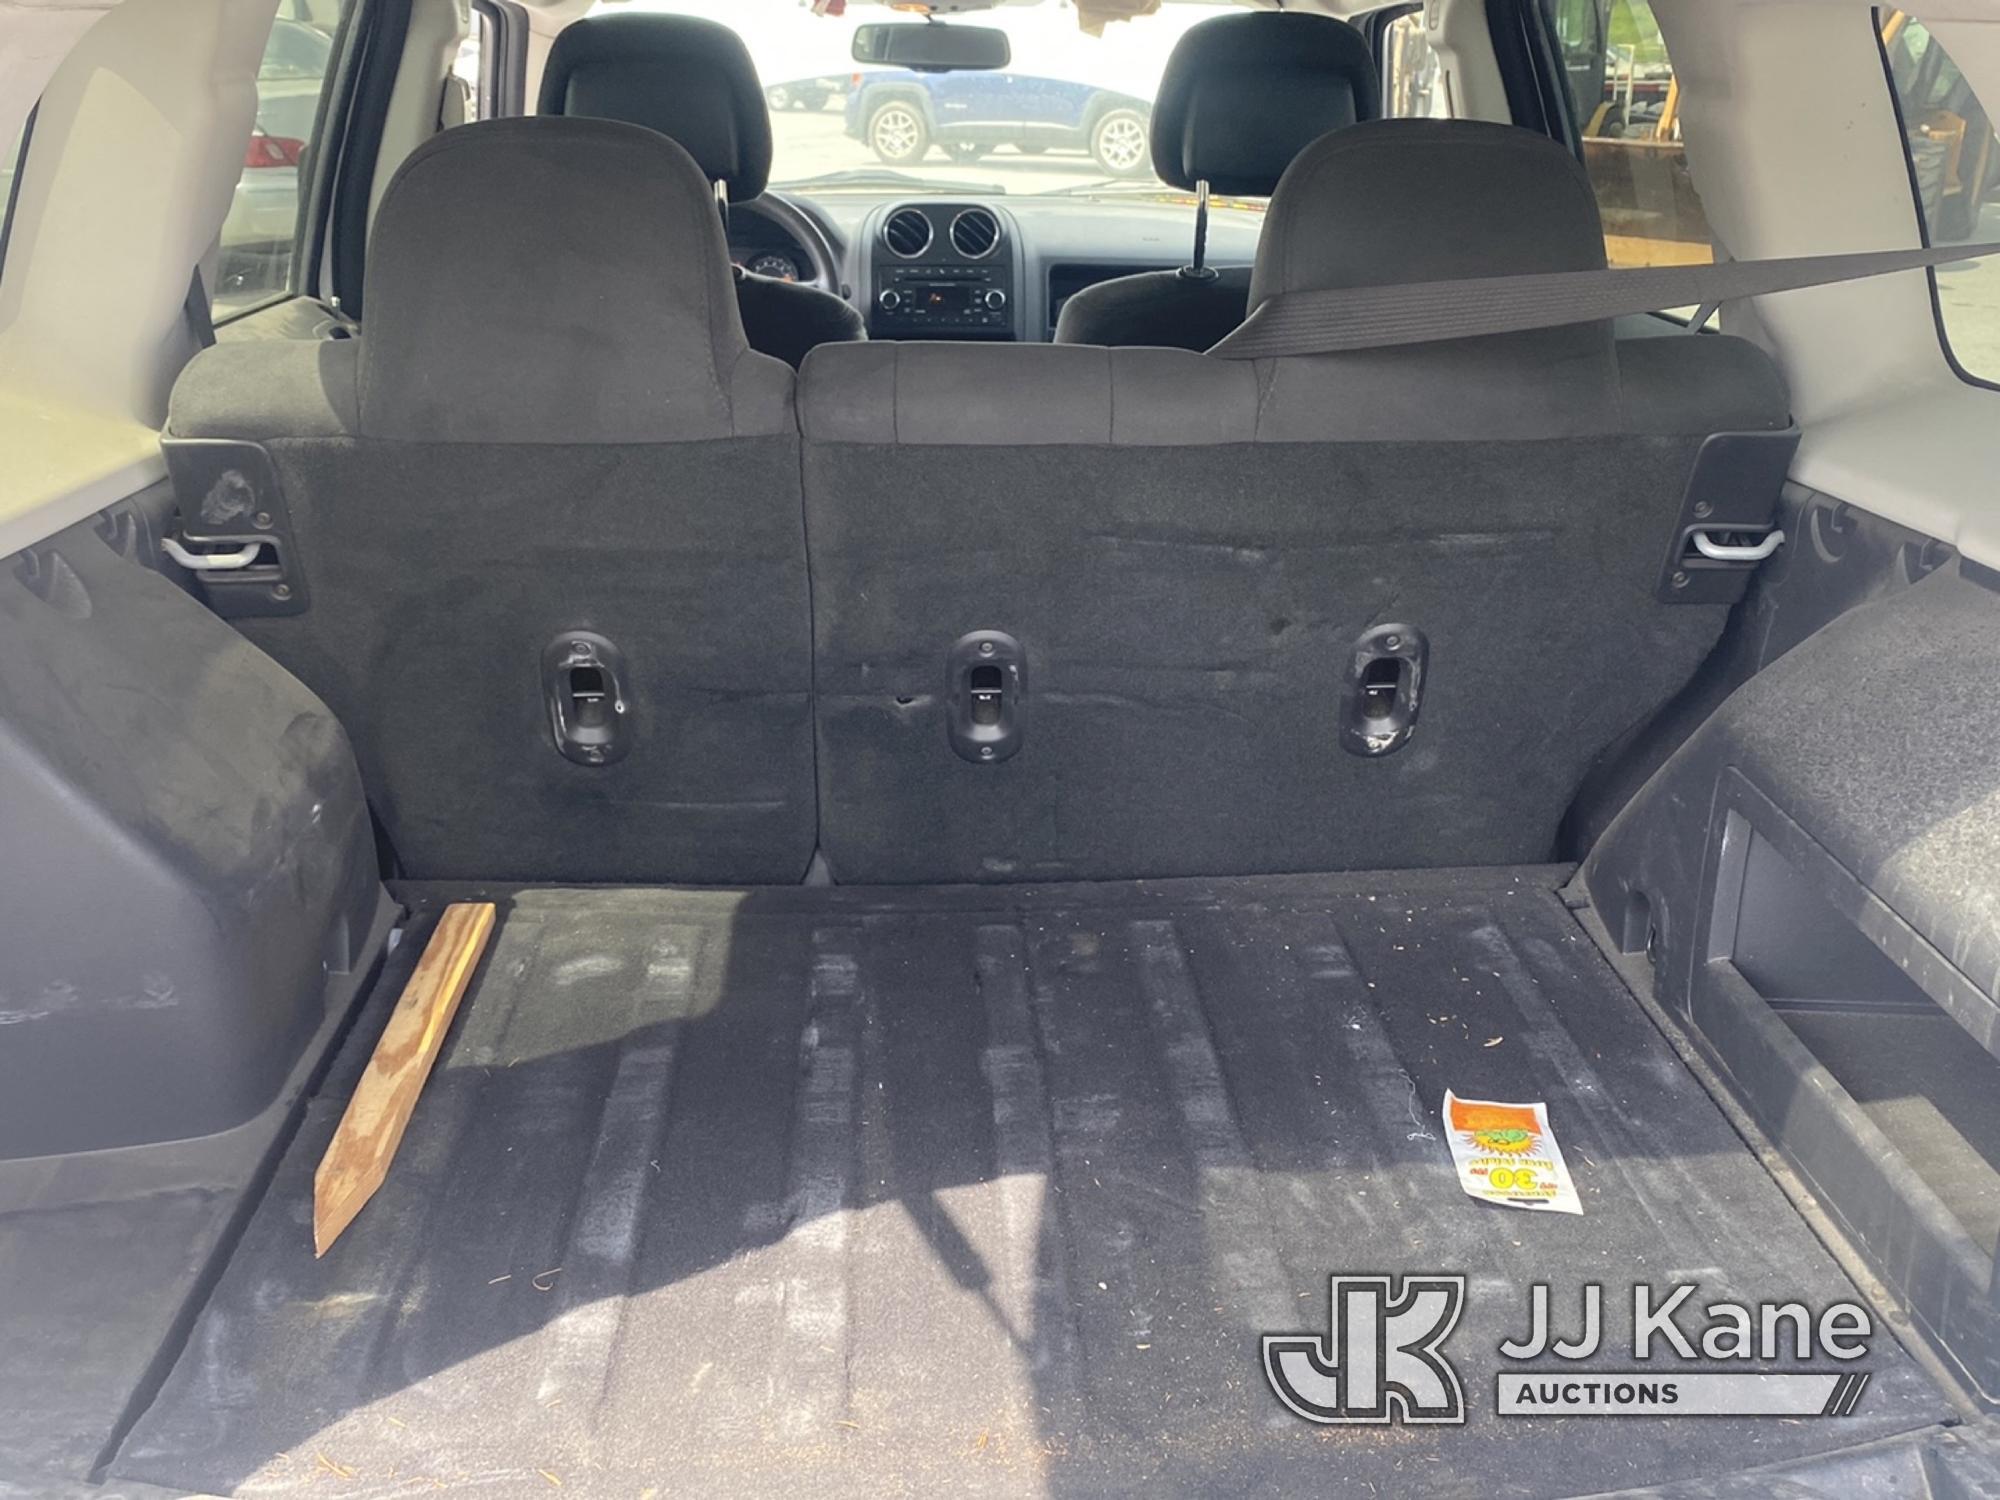 (Chester Springs, PA) 2016 Jeep Patriot 4x4 4-Door Sport Utility Vehicle Runs & Moves) (Only Runs On